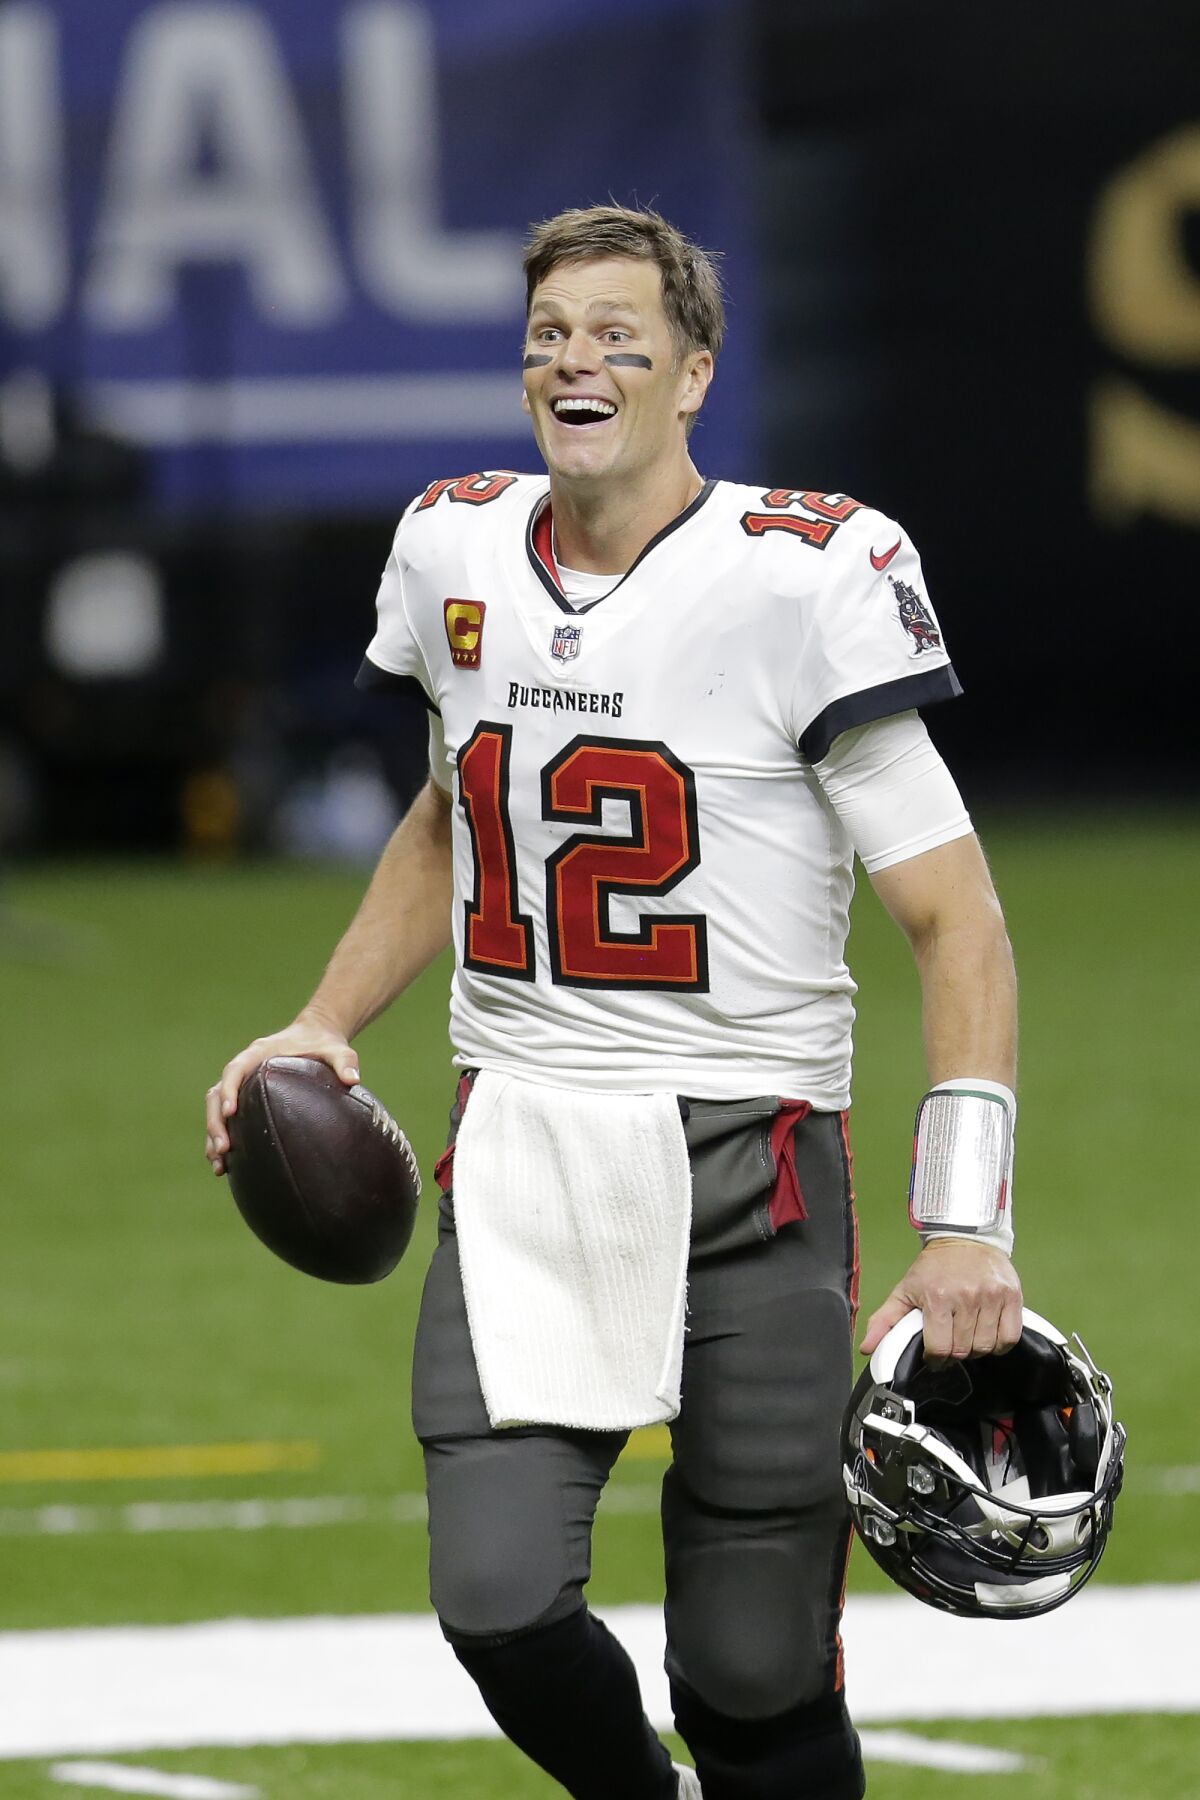 FILE - Tampa Bay Buccaneers quarterback Tom Brady smiles after an NFL divisional round playoff football game against the New Orleans Saints in New Orleans, in this Sunday, Jan. 17, 2021, file photo. The Buccaneers won 30-20. Reporters who covered Tom Brady for two decades in New England rarely expected anything enlightening or entertaining to emerge from the quarterback’s mouth. Keep to the straight and narrow, reveal nothing about yourself or your team, and just win. So when Brady began cracking wise as a Tampa Bay quarterback and, once again, as a Super Bowl MVP, people took notice. (AP Photo/Brett Duke, File)